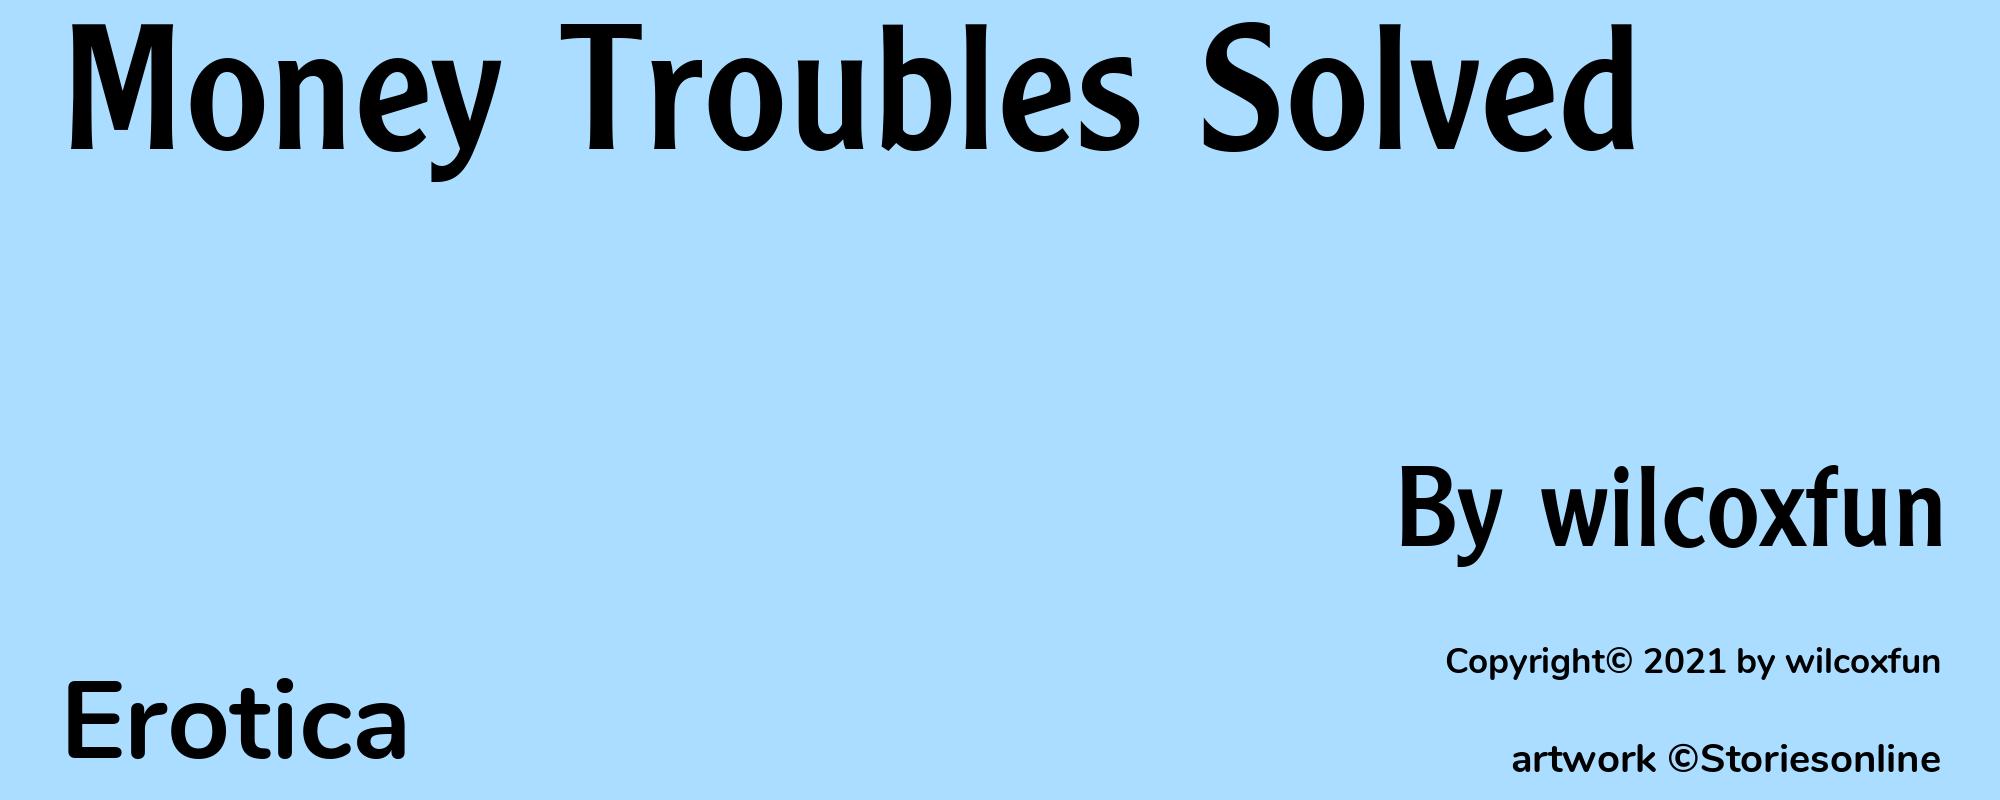 Money Troubles Solved - Cover